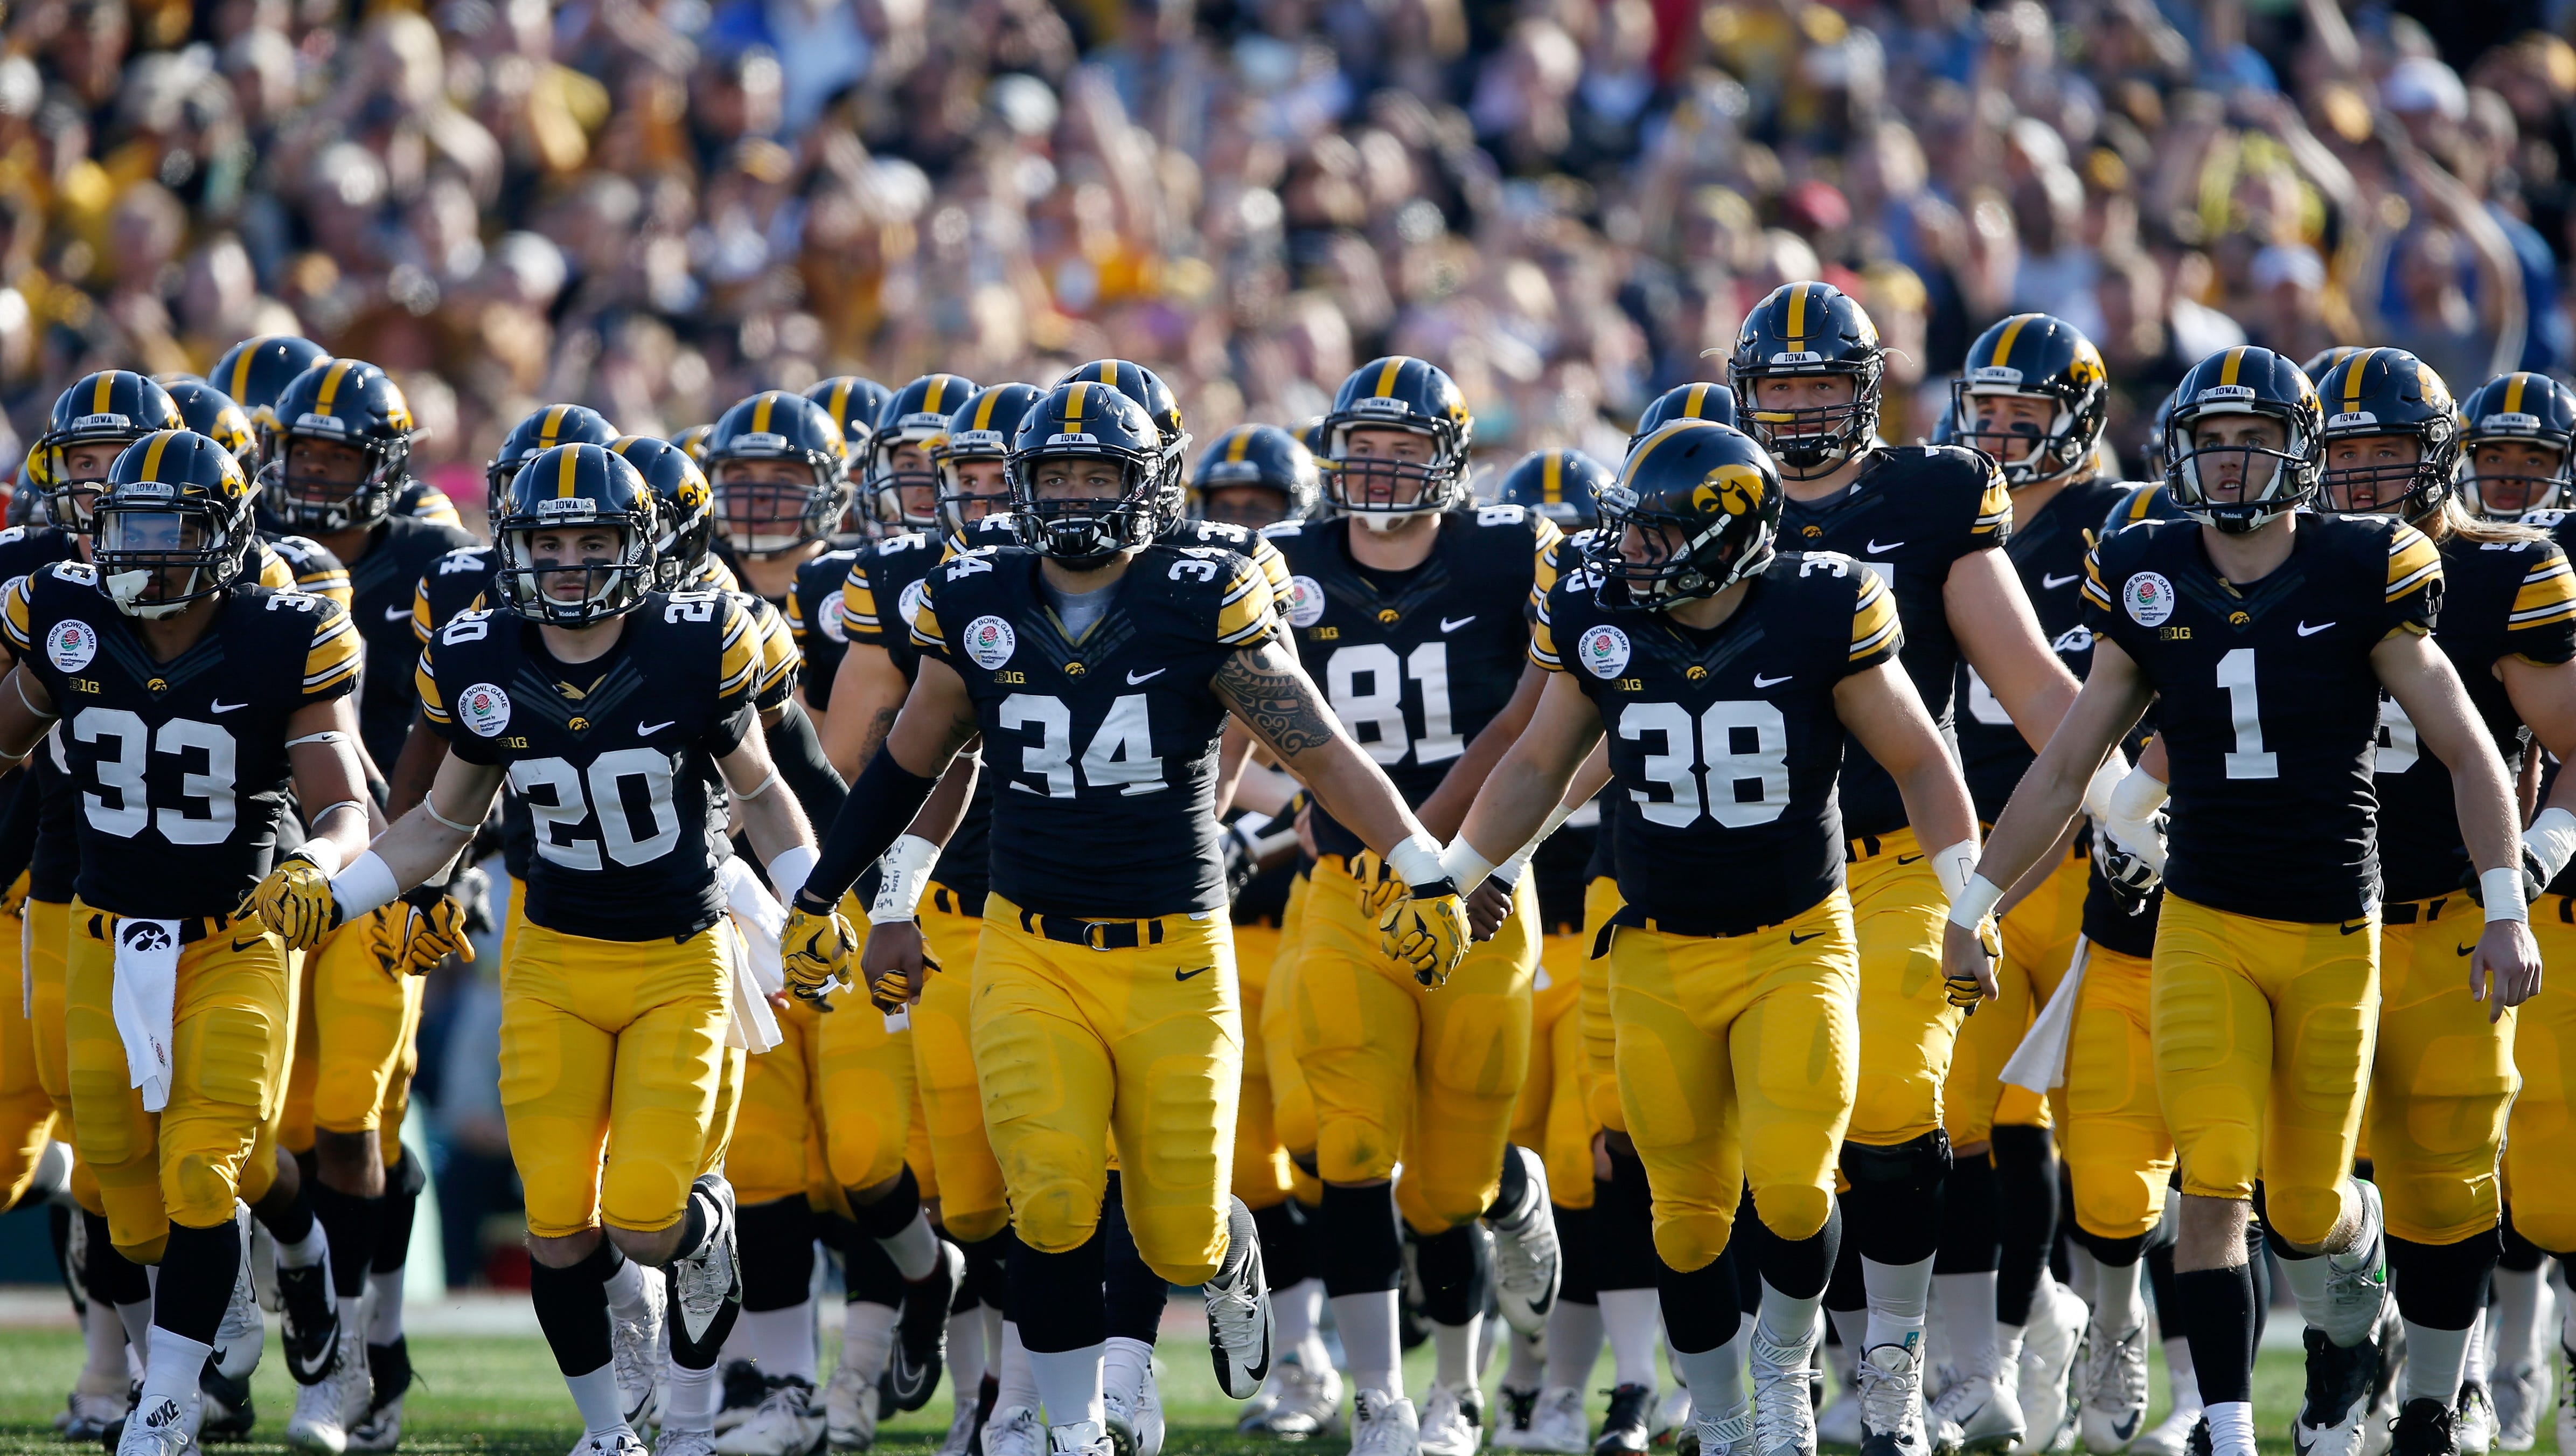 The Iowa Hawkeyes walk onto the field to face the Stanford Cardinal in the 102nd Rose Bowl Game on January 1, 2016 at the Rose Bowl in Pasadena, California.